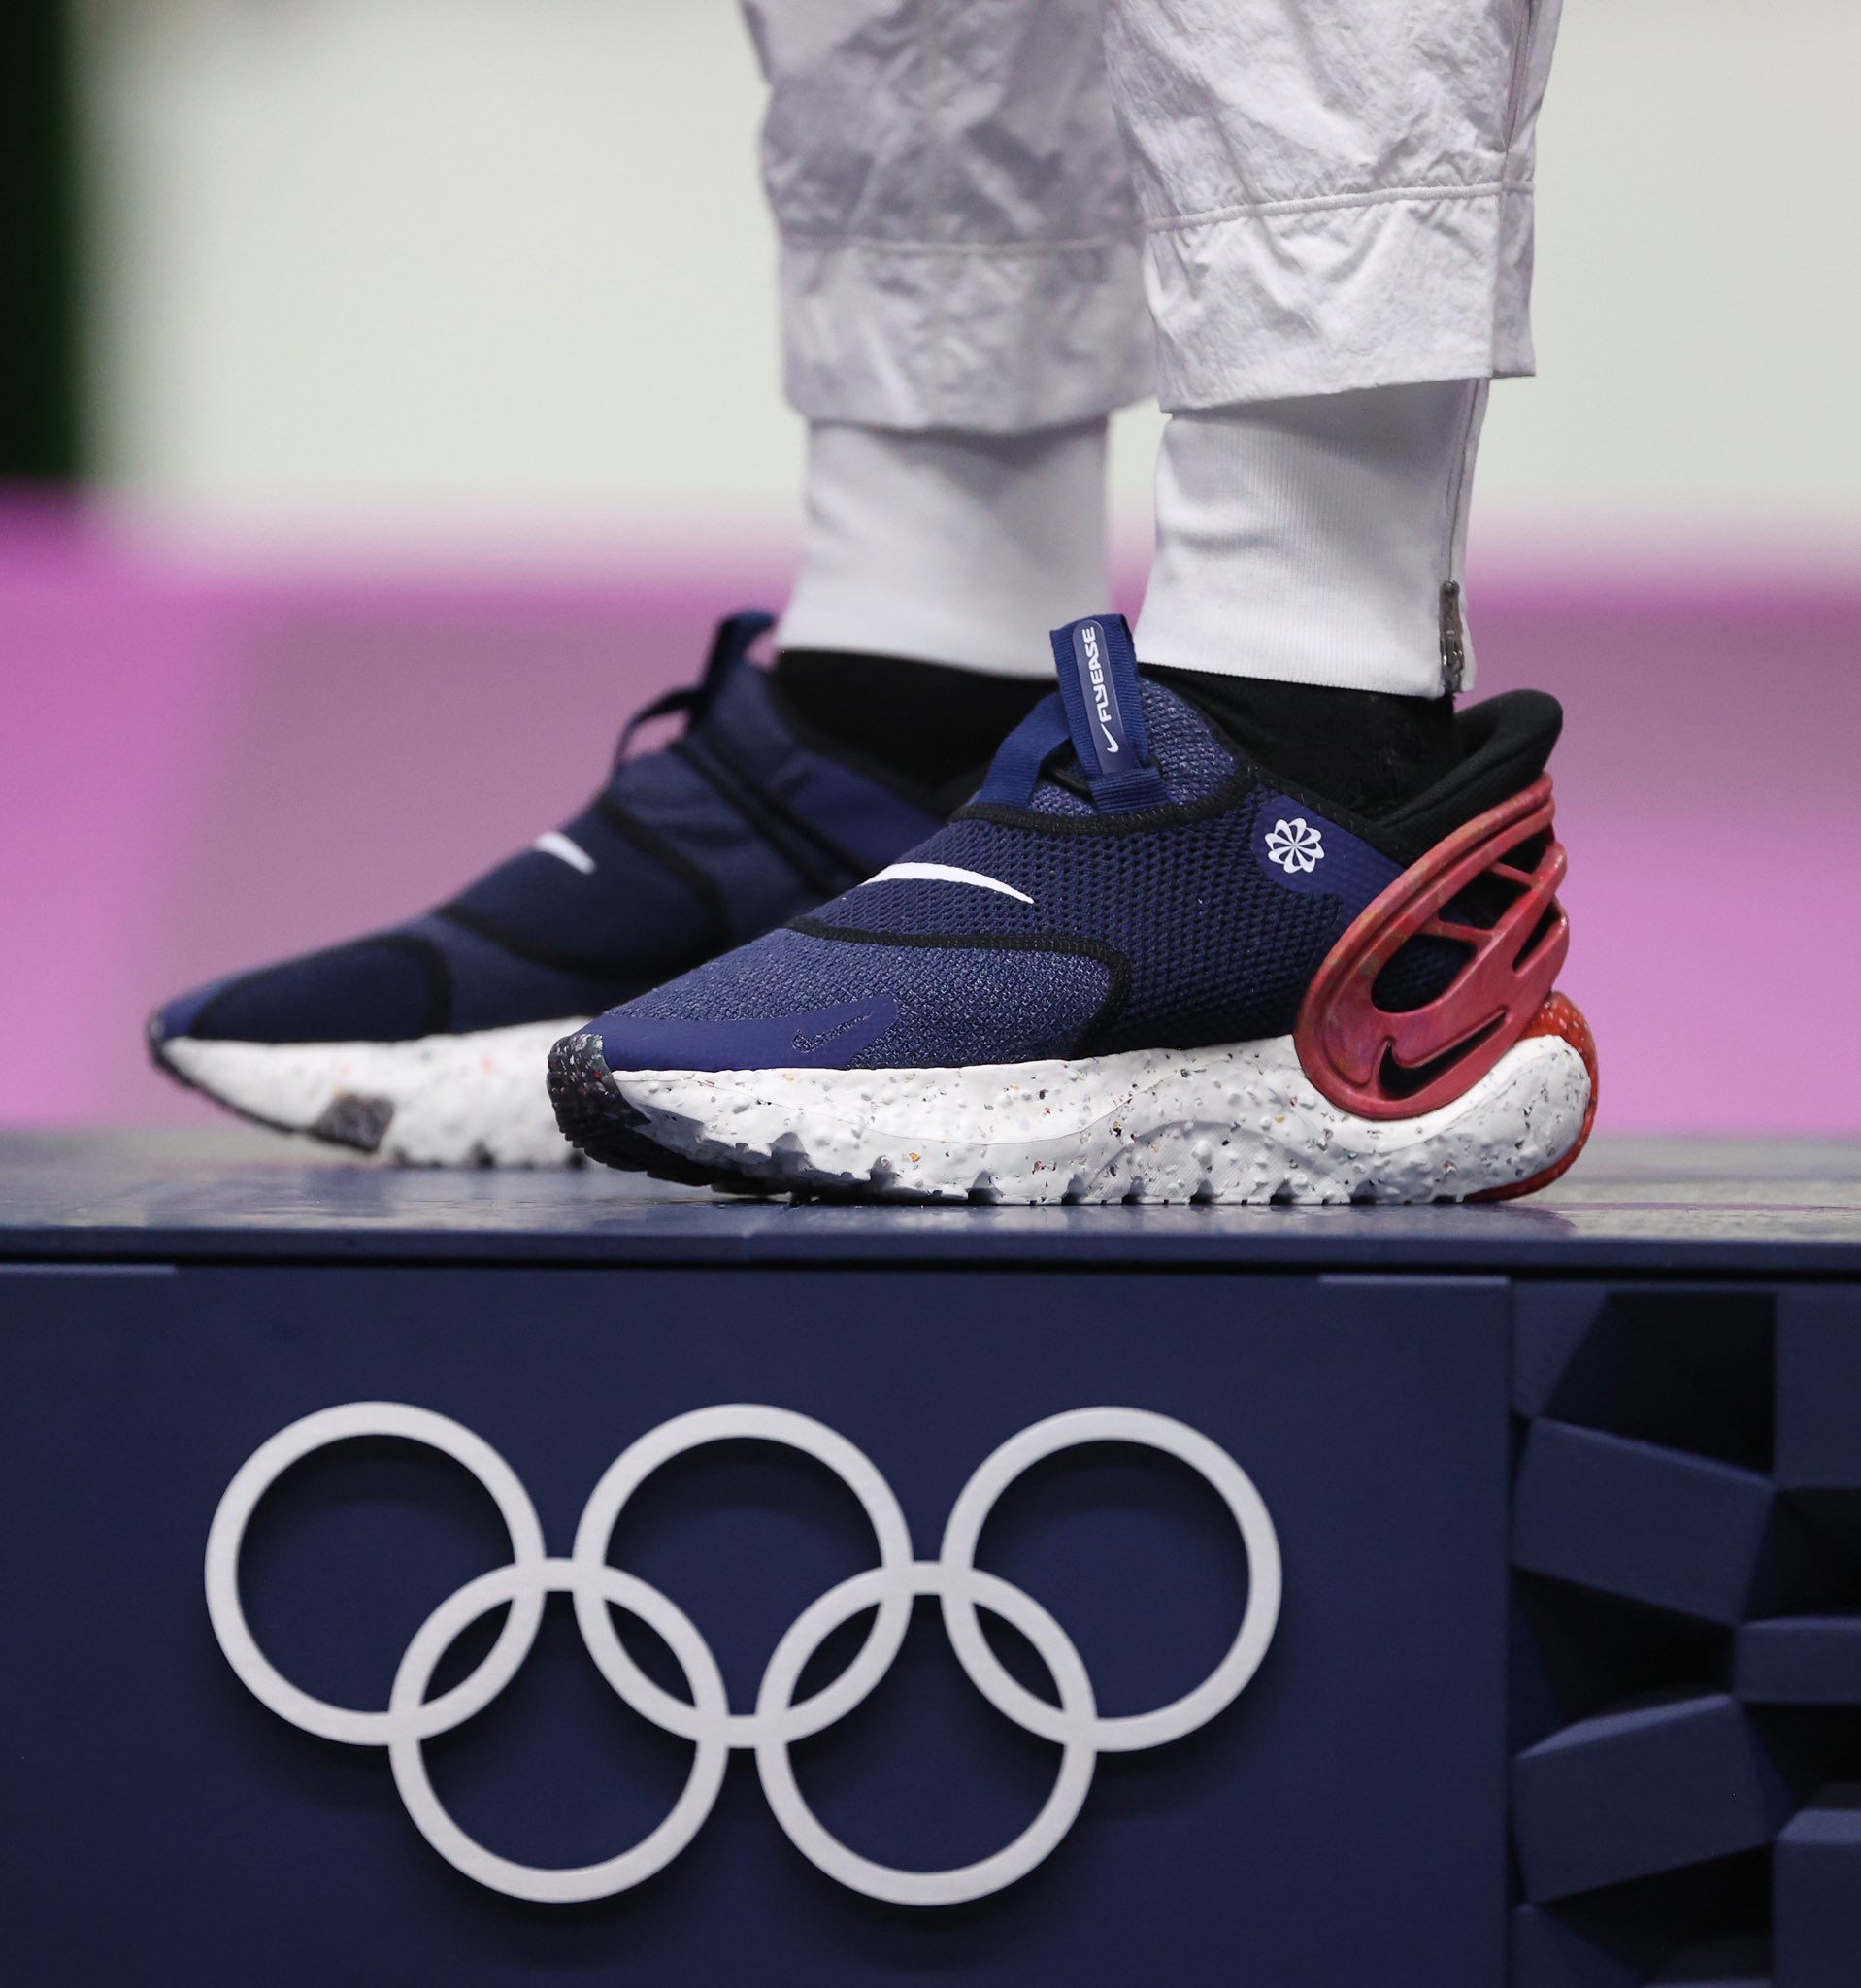 Nike Goes for Gold at the Olympics with Latest FlyEase Shoe SoleSavy News